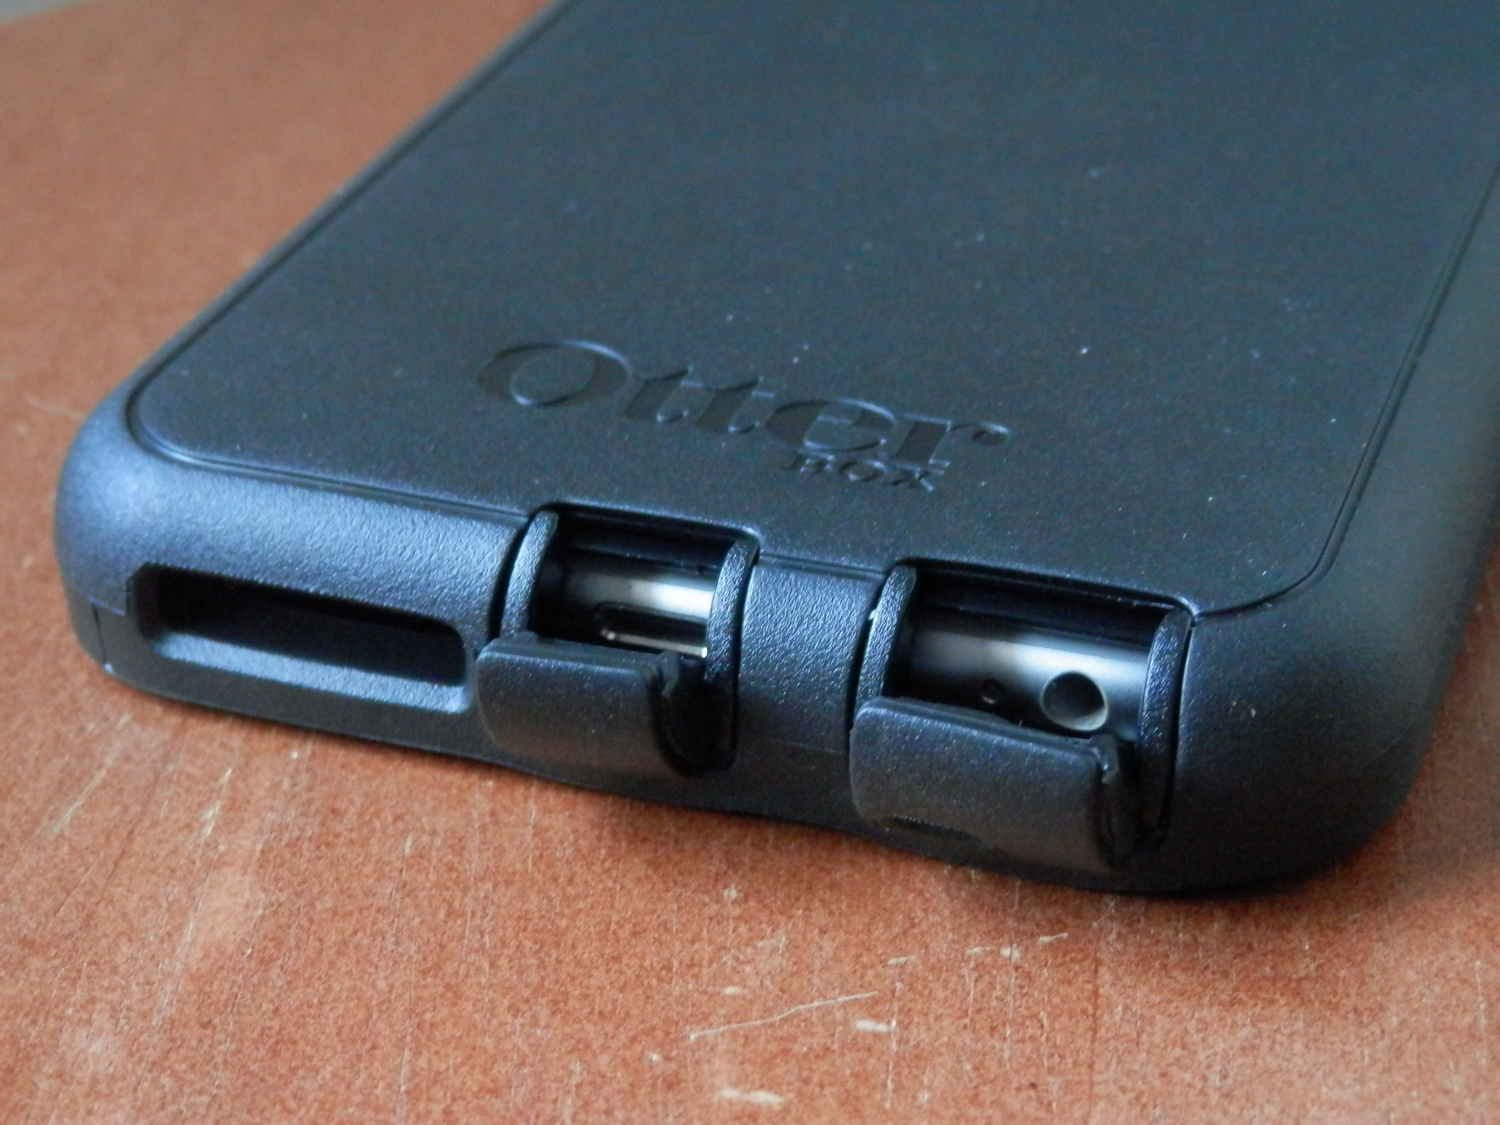 otterbox-defender-series-ports-open